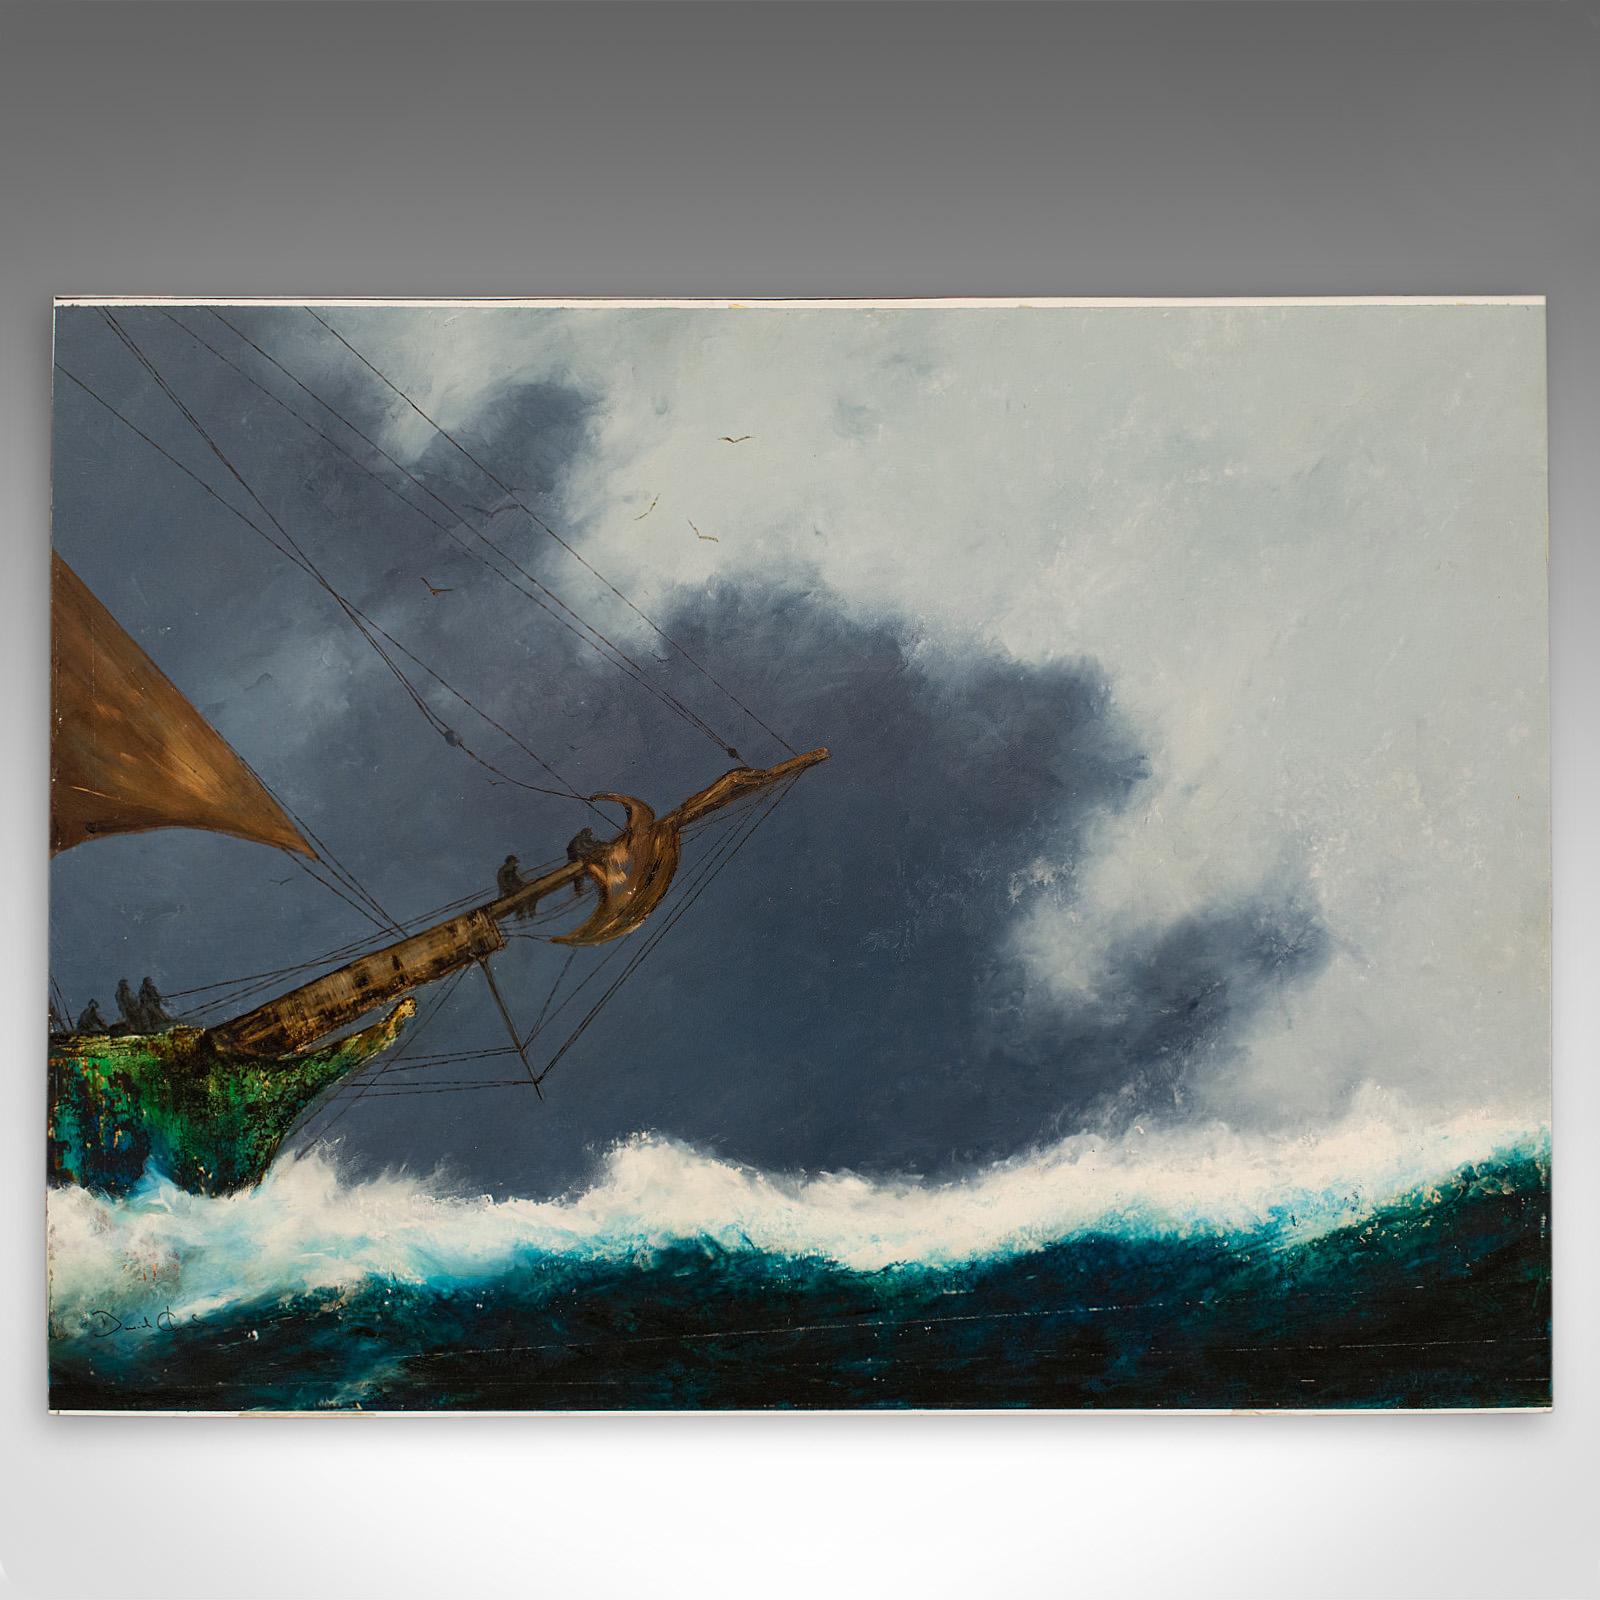 This is a large, seascape oil painting by the renowned marine and equine artist David Chambers. 'Spear' is an original, oil on board painting from David’s recent collection.

A fascinating composition, the slender prow of an emerald green ship